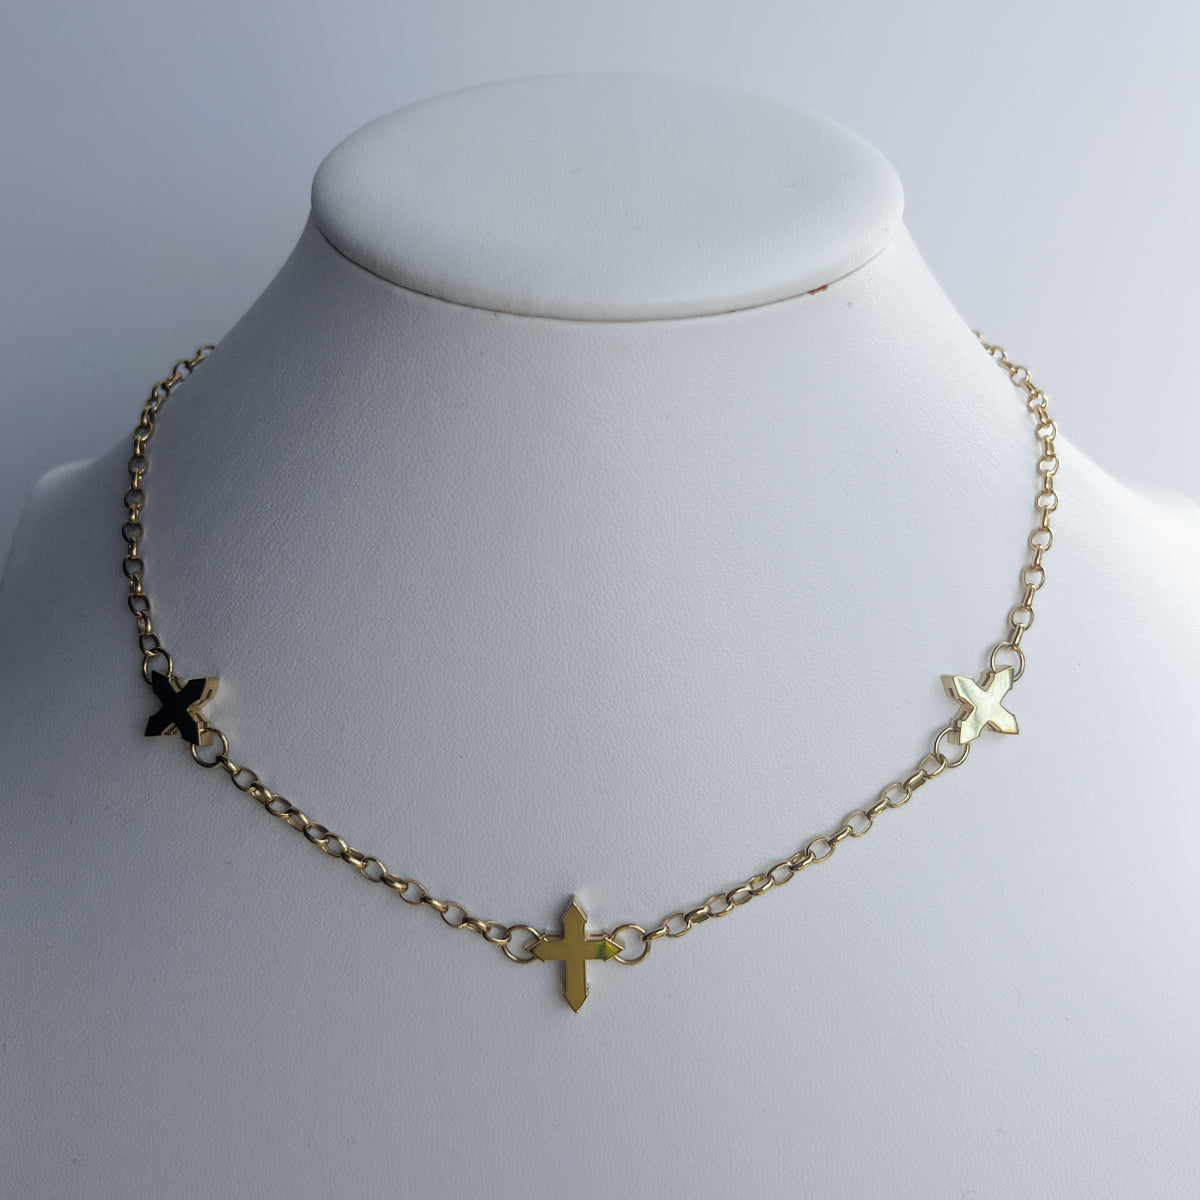 NECKLACE "TRINITY" / GOLD-PLATED SILVER